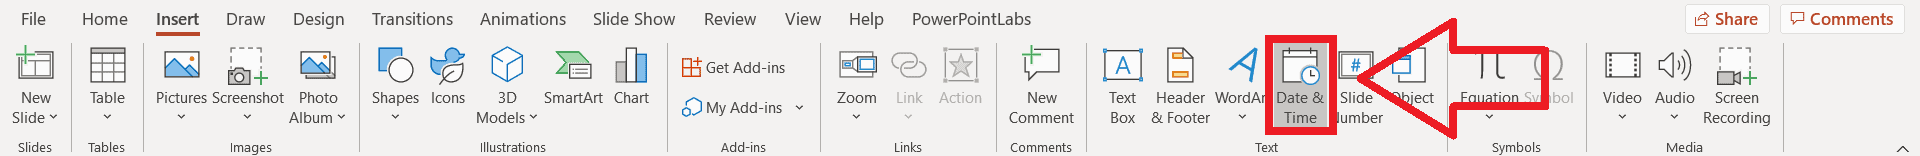 PowerPoint real-time clock